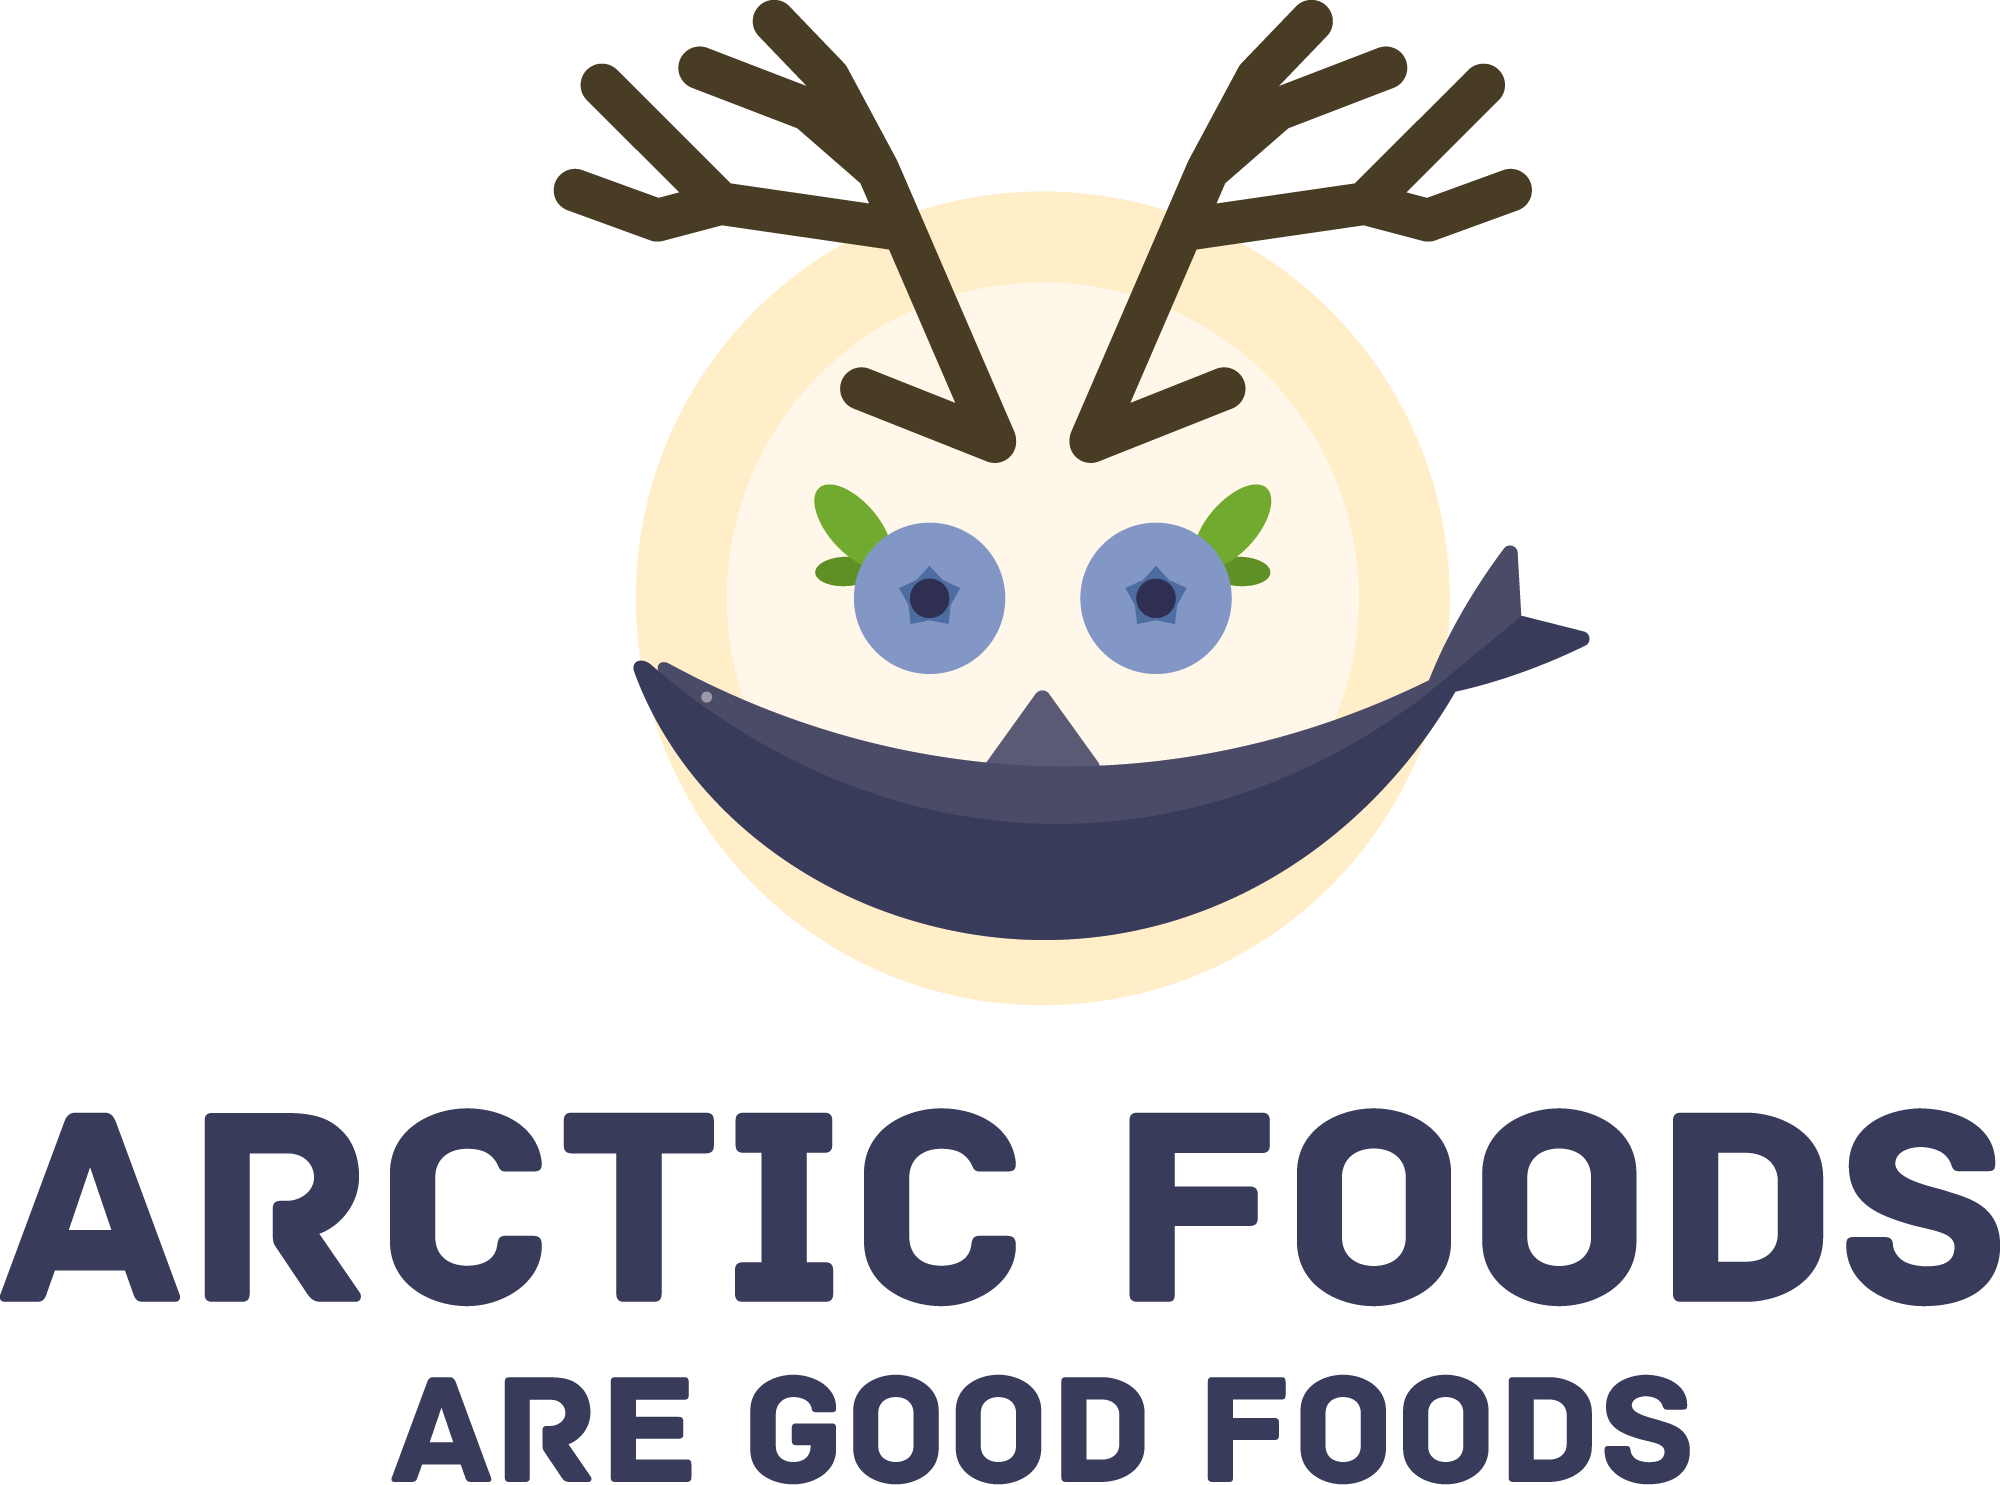 Arctic Foods are Good Foods is a project aiming to raise awareness of health 
benefits associated with the traditional cuisine of the indigenous peoples of the High North, Arctic wild-growing herbs, and meat and fish products originating from the Arctic.